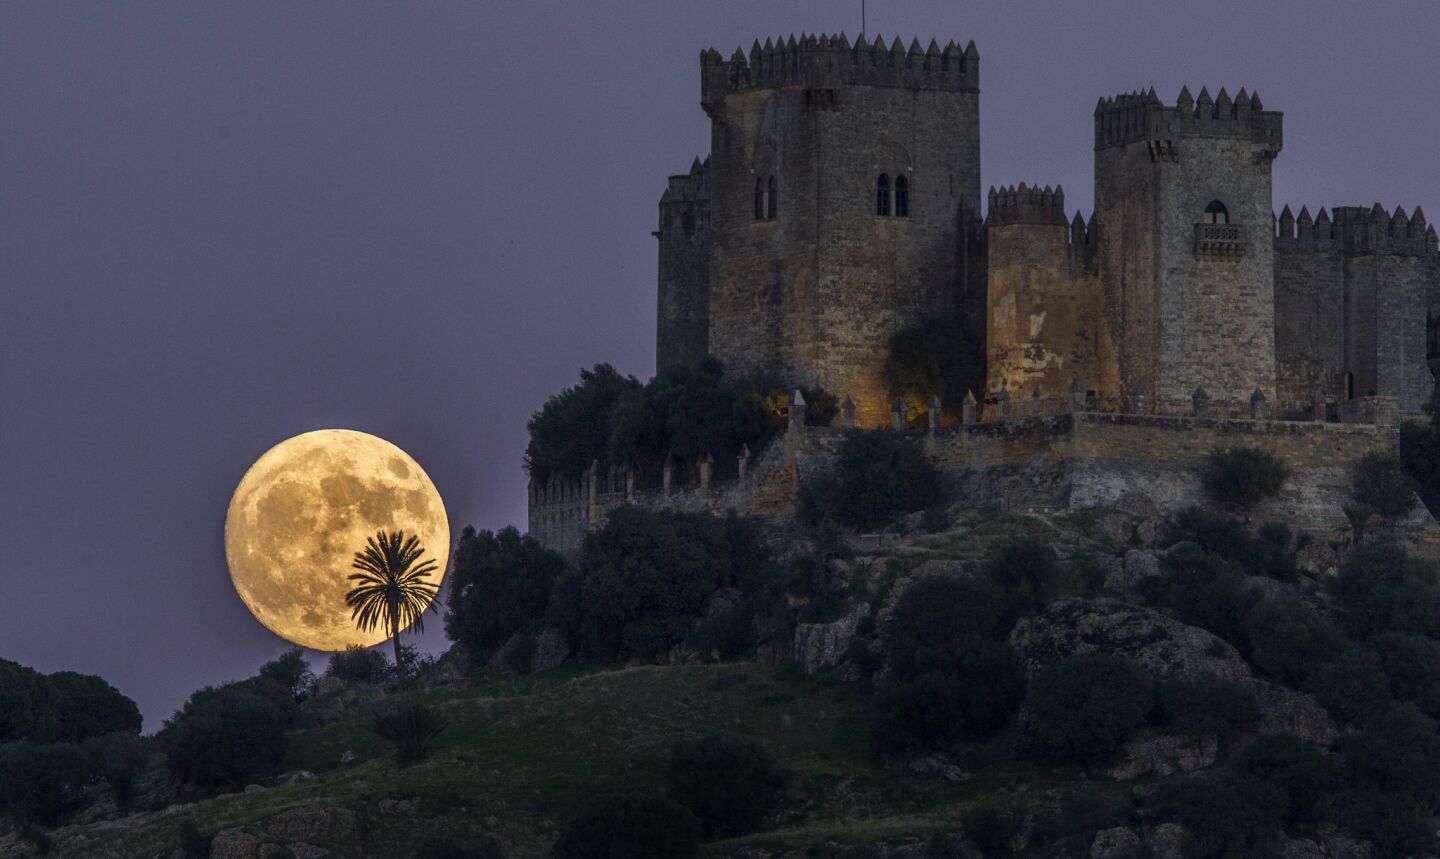 The moon rises behind the castle of Almodovar in Cordoba, southern Spain.